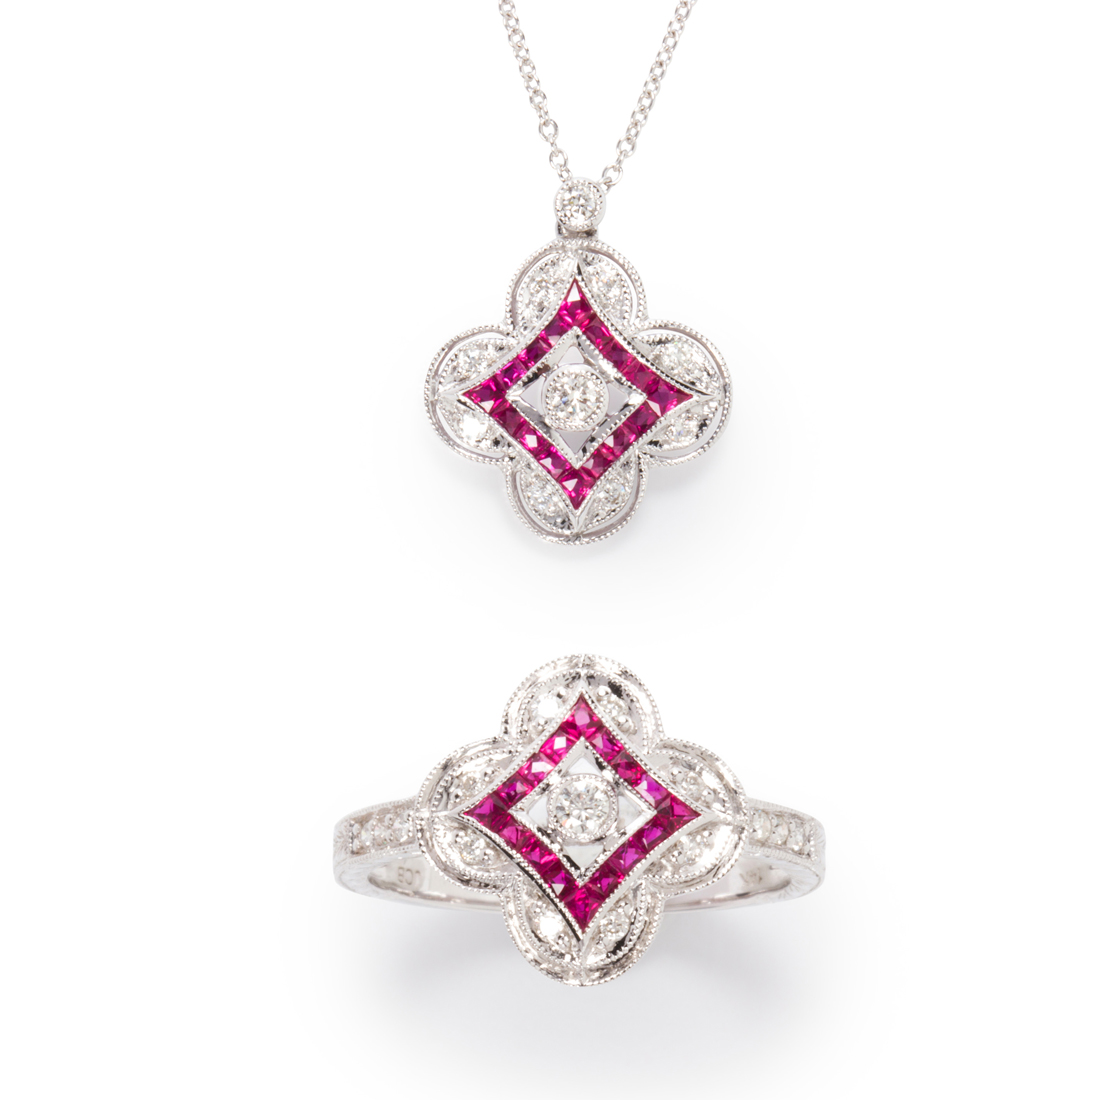 A RUBY AND DIAMOND RING AND PENDANT